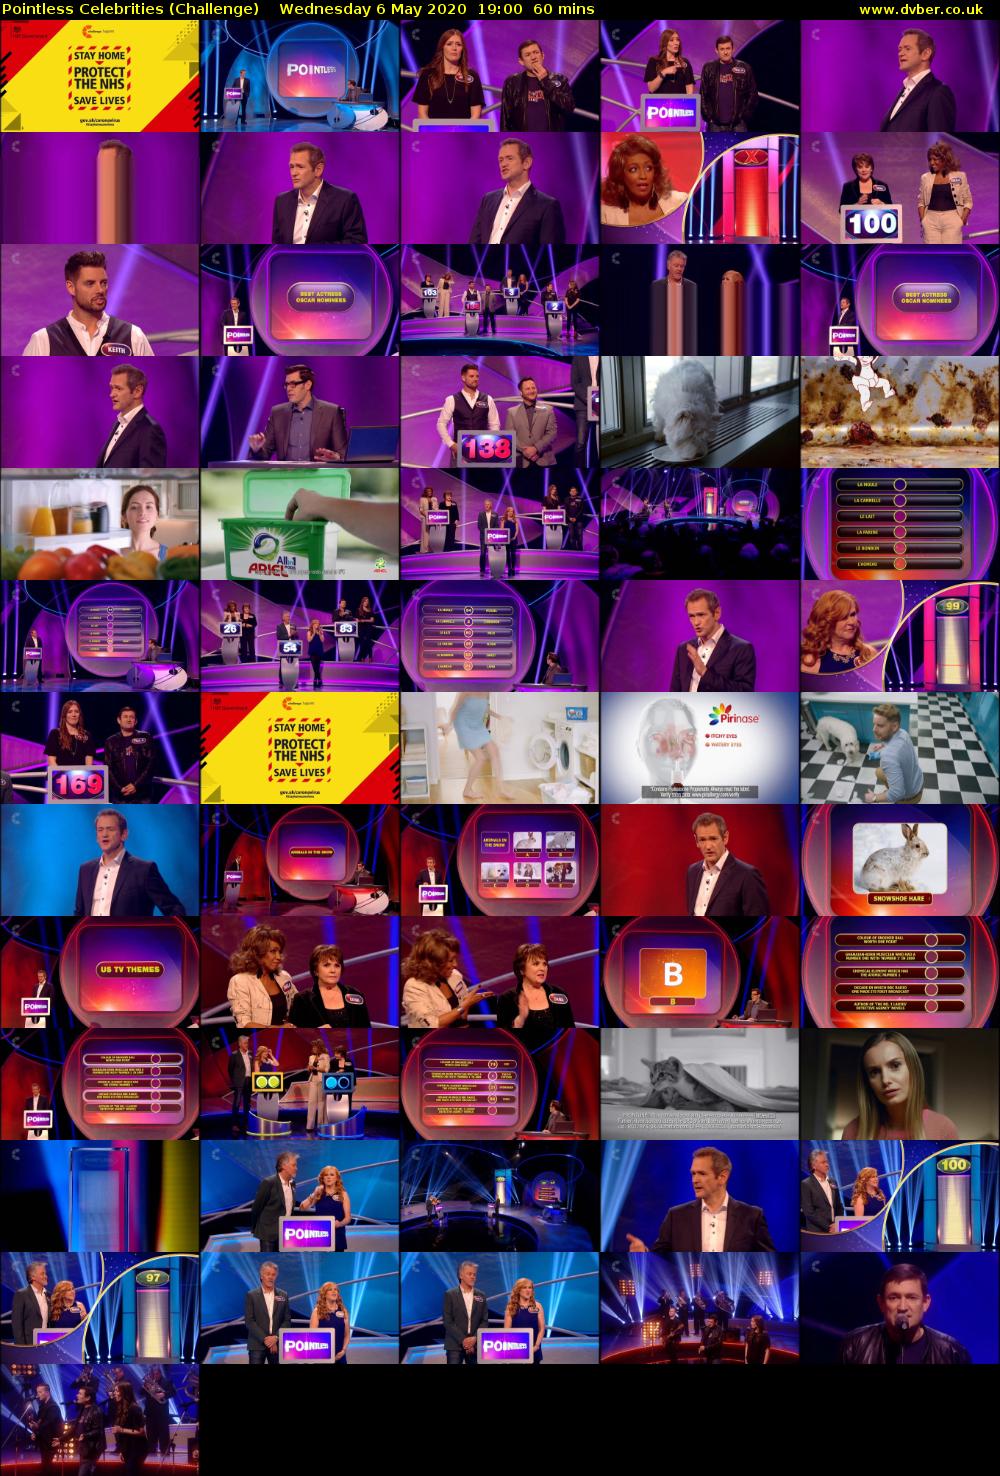 Pointless Celebrities (Challenge) Wednesday 6 May 2020 19:00 - 20:00